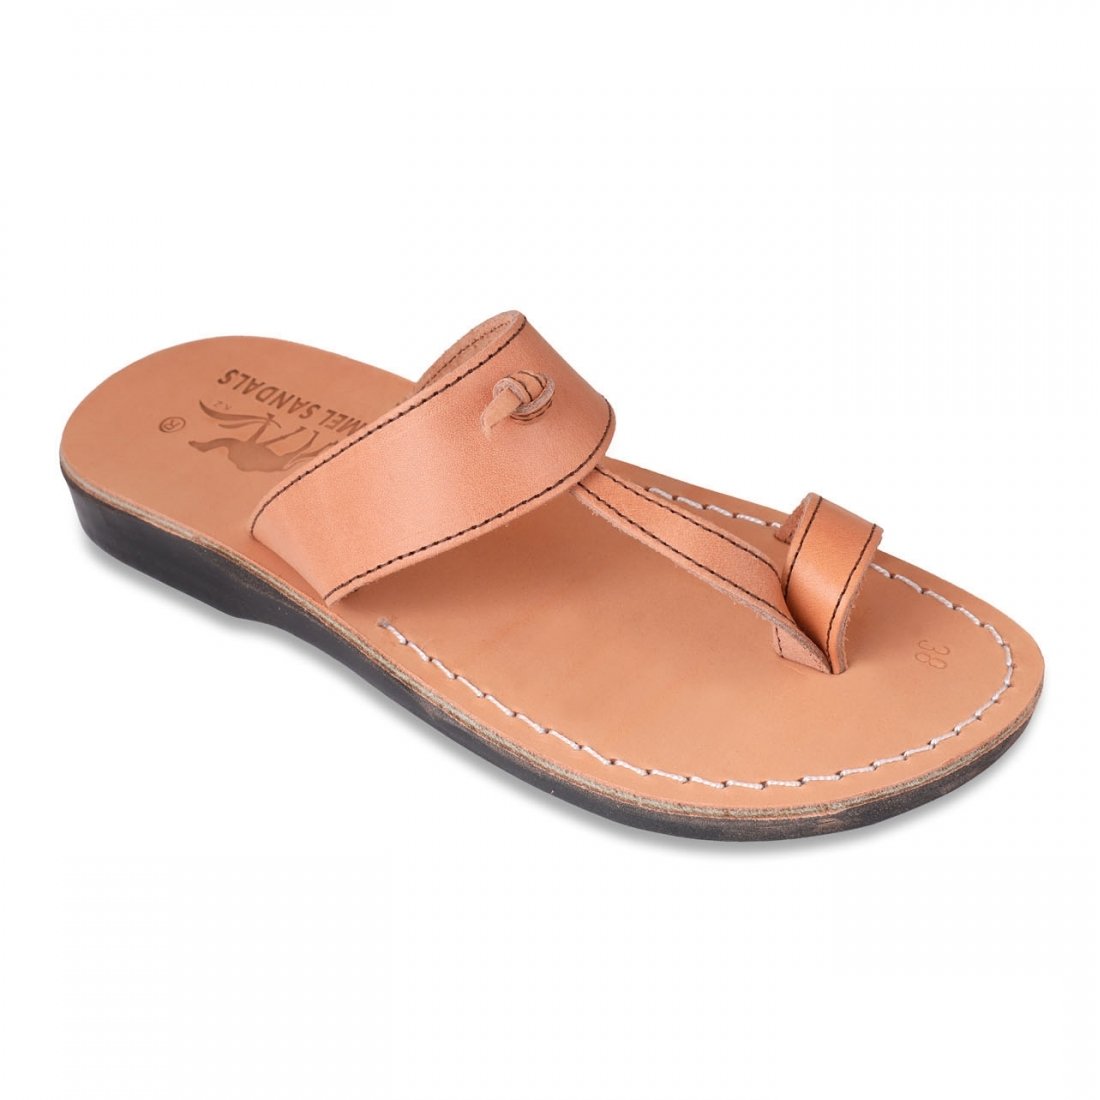 Oasis Handmade Leather Sandals. Variety of Colors - 1